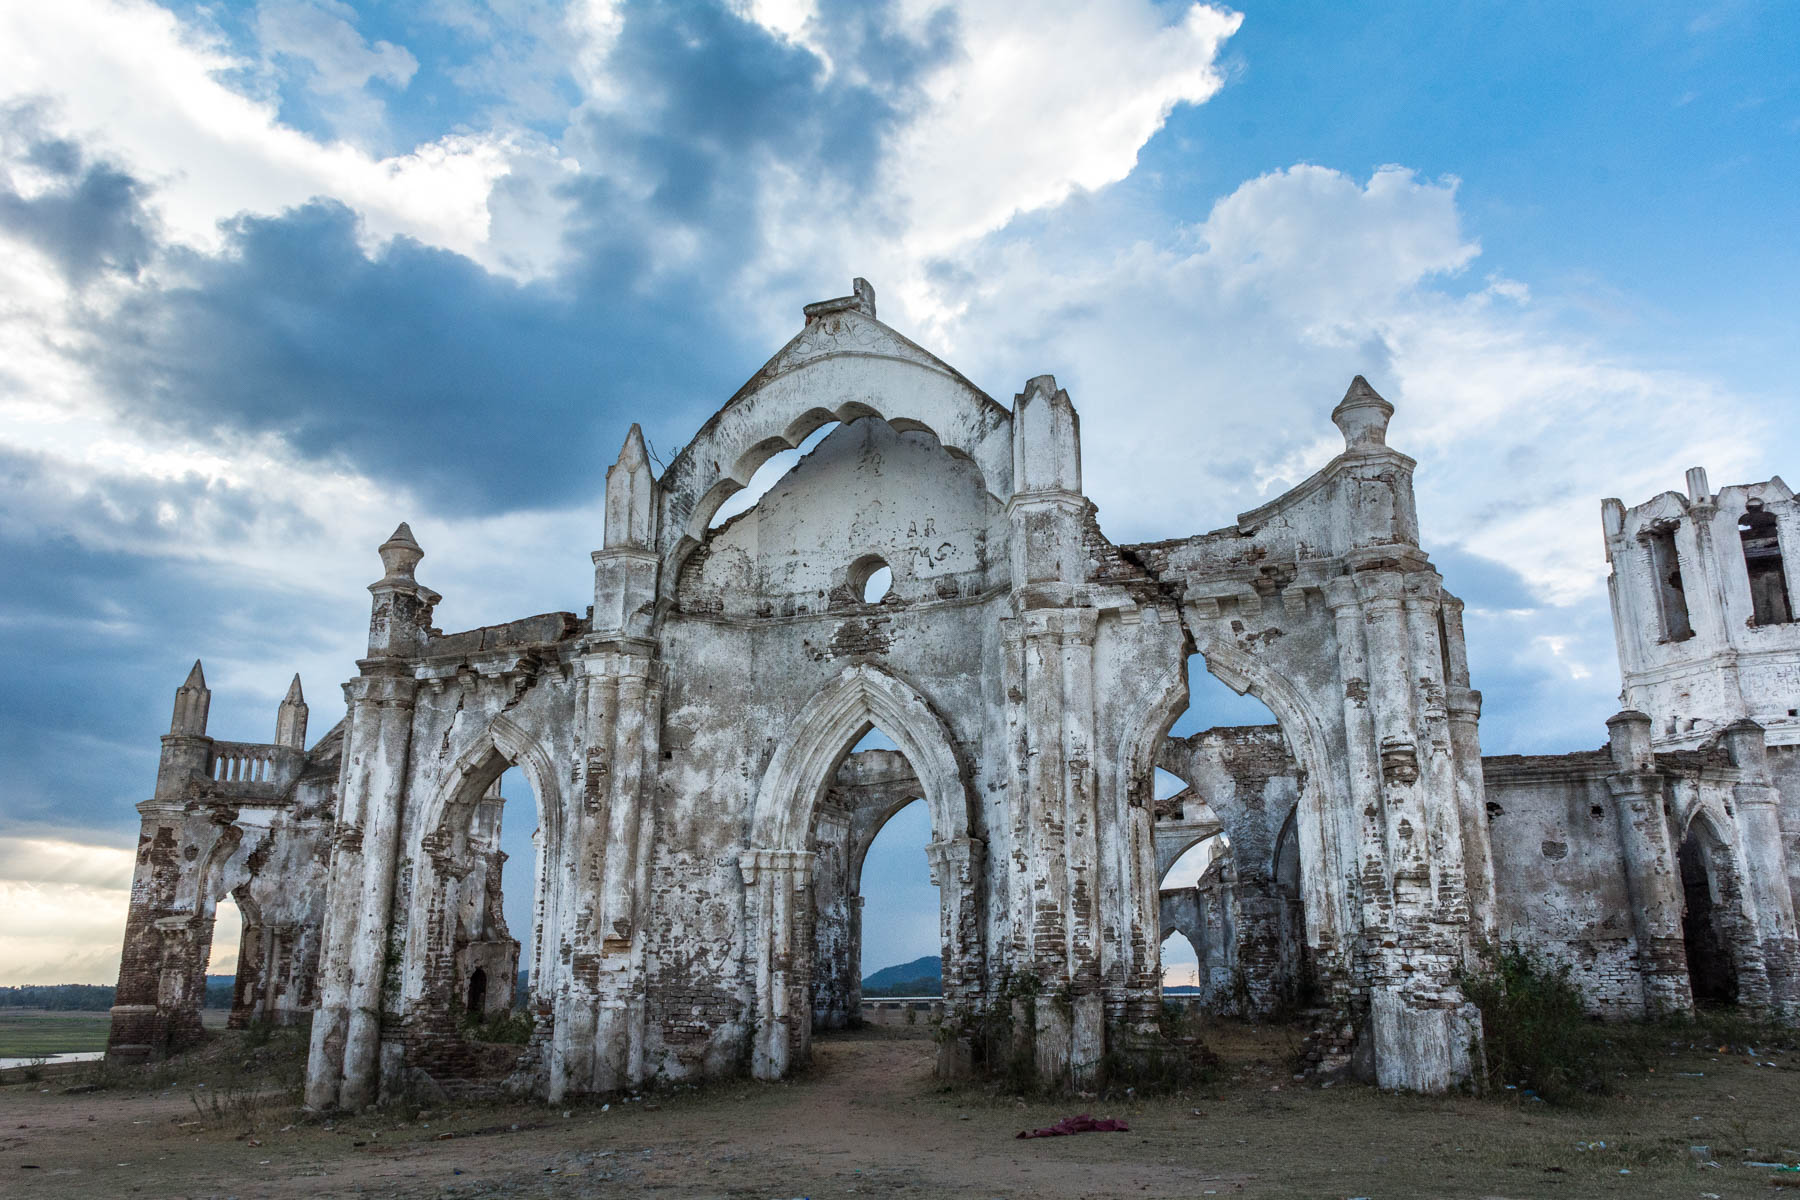 Off the beaten track places to visit in Karnataka, India - Shettihalli Rosary Church - Lost With Purpose